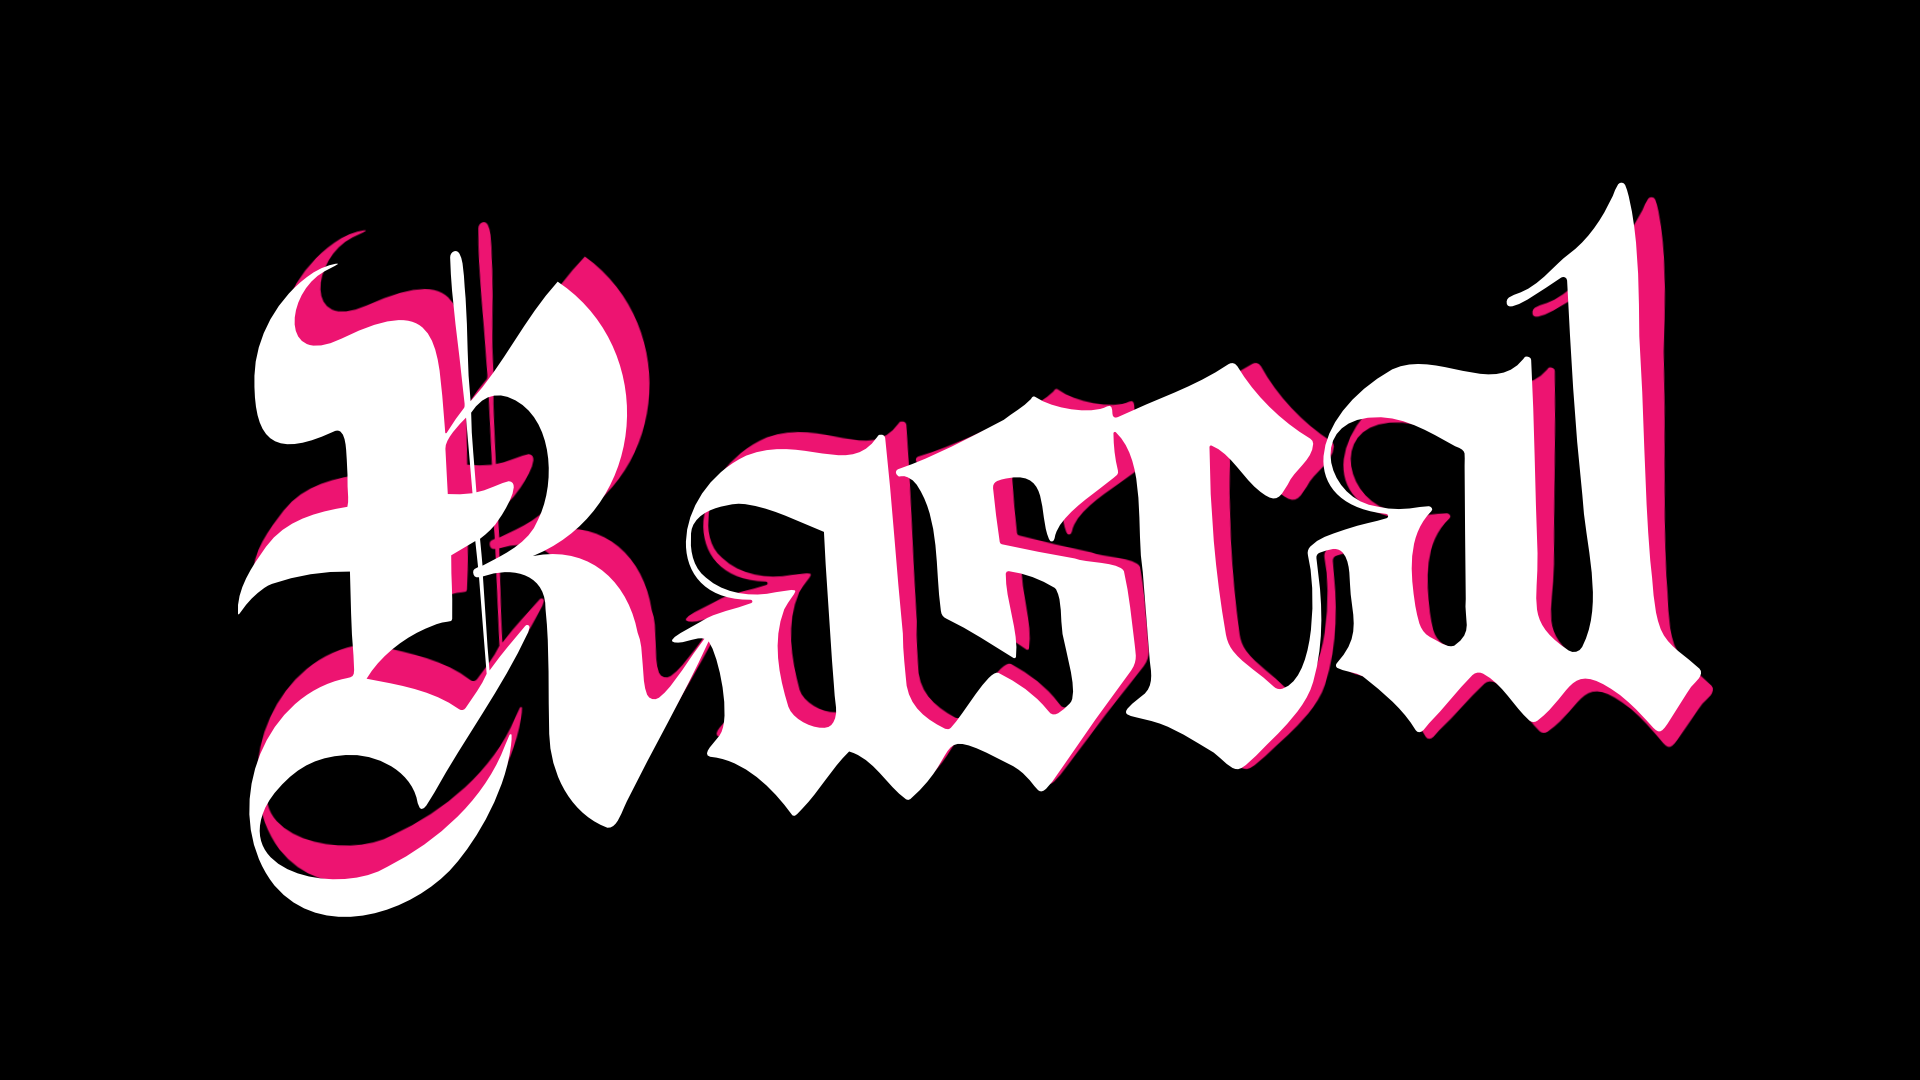 A logo with stylized fancy font that reads "Rascal" in pink and white, on a black background